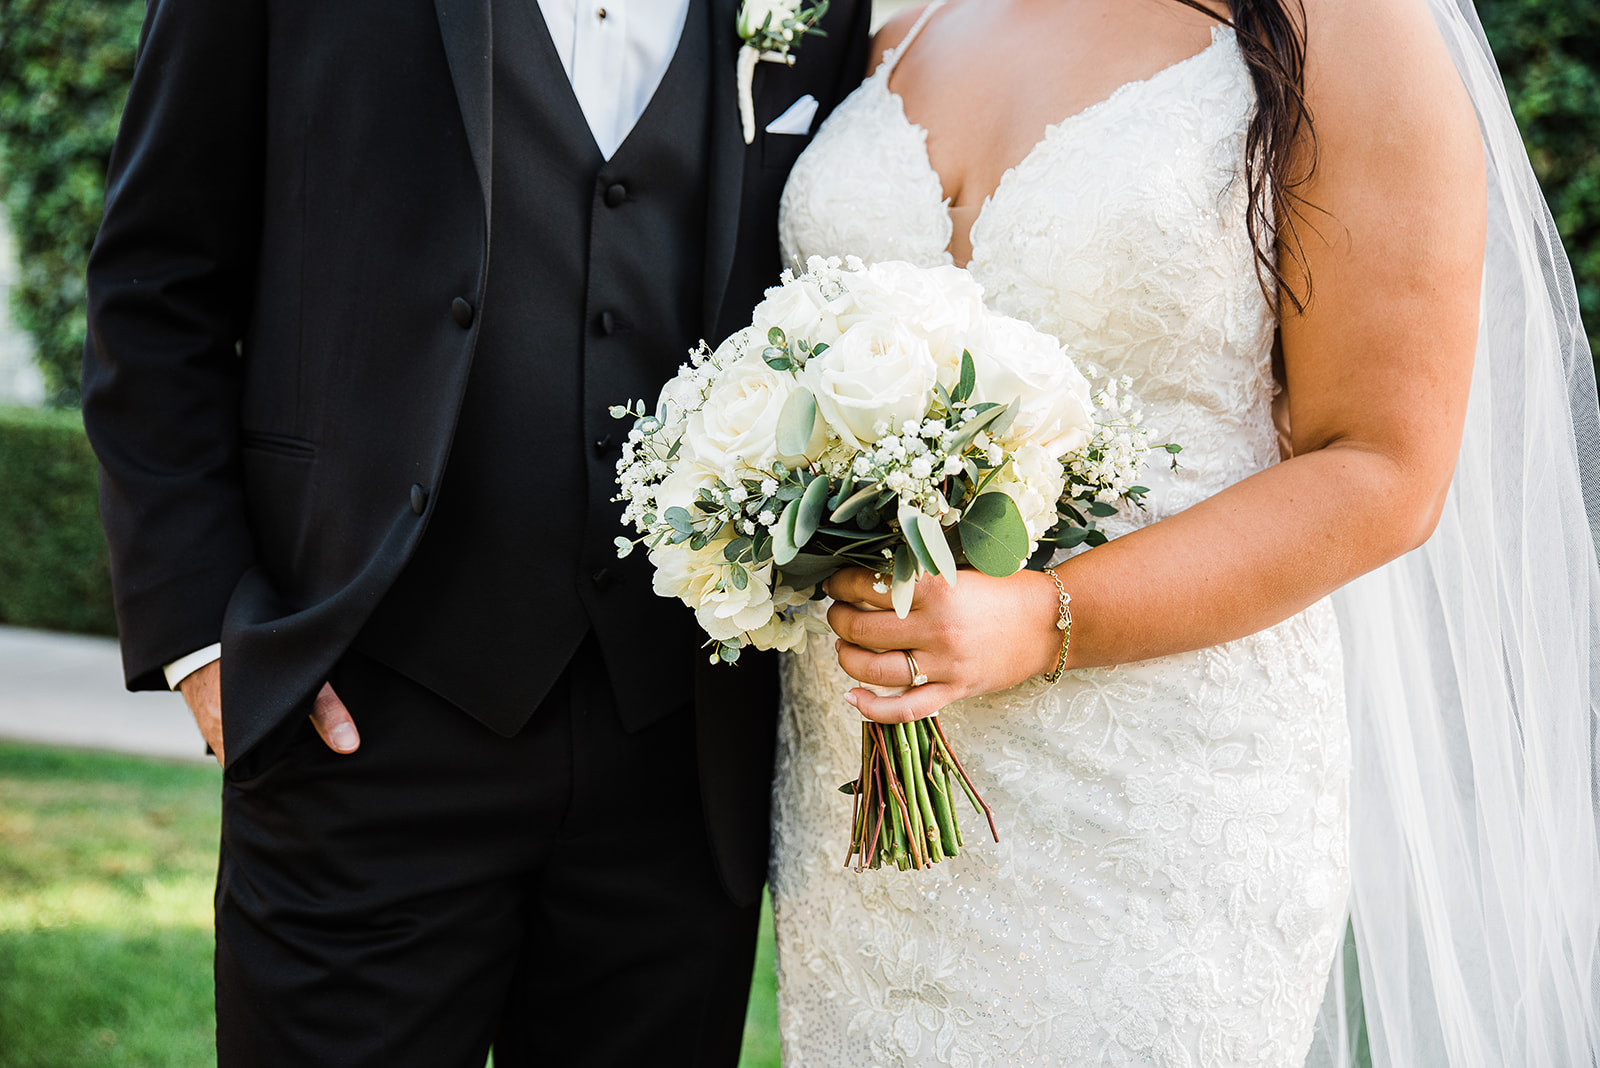 Newlyweds stand in a garden holding the white bouquet in a lace dress and black tuxedo